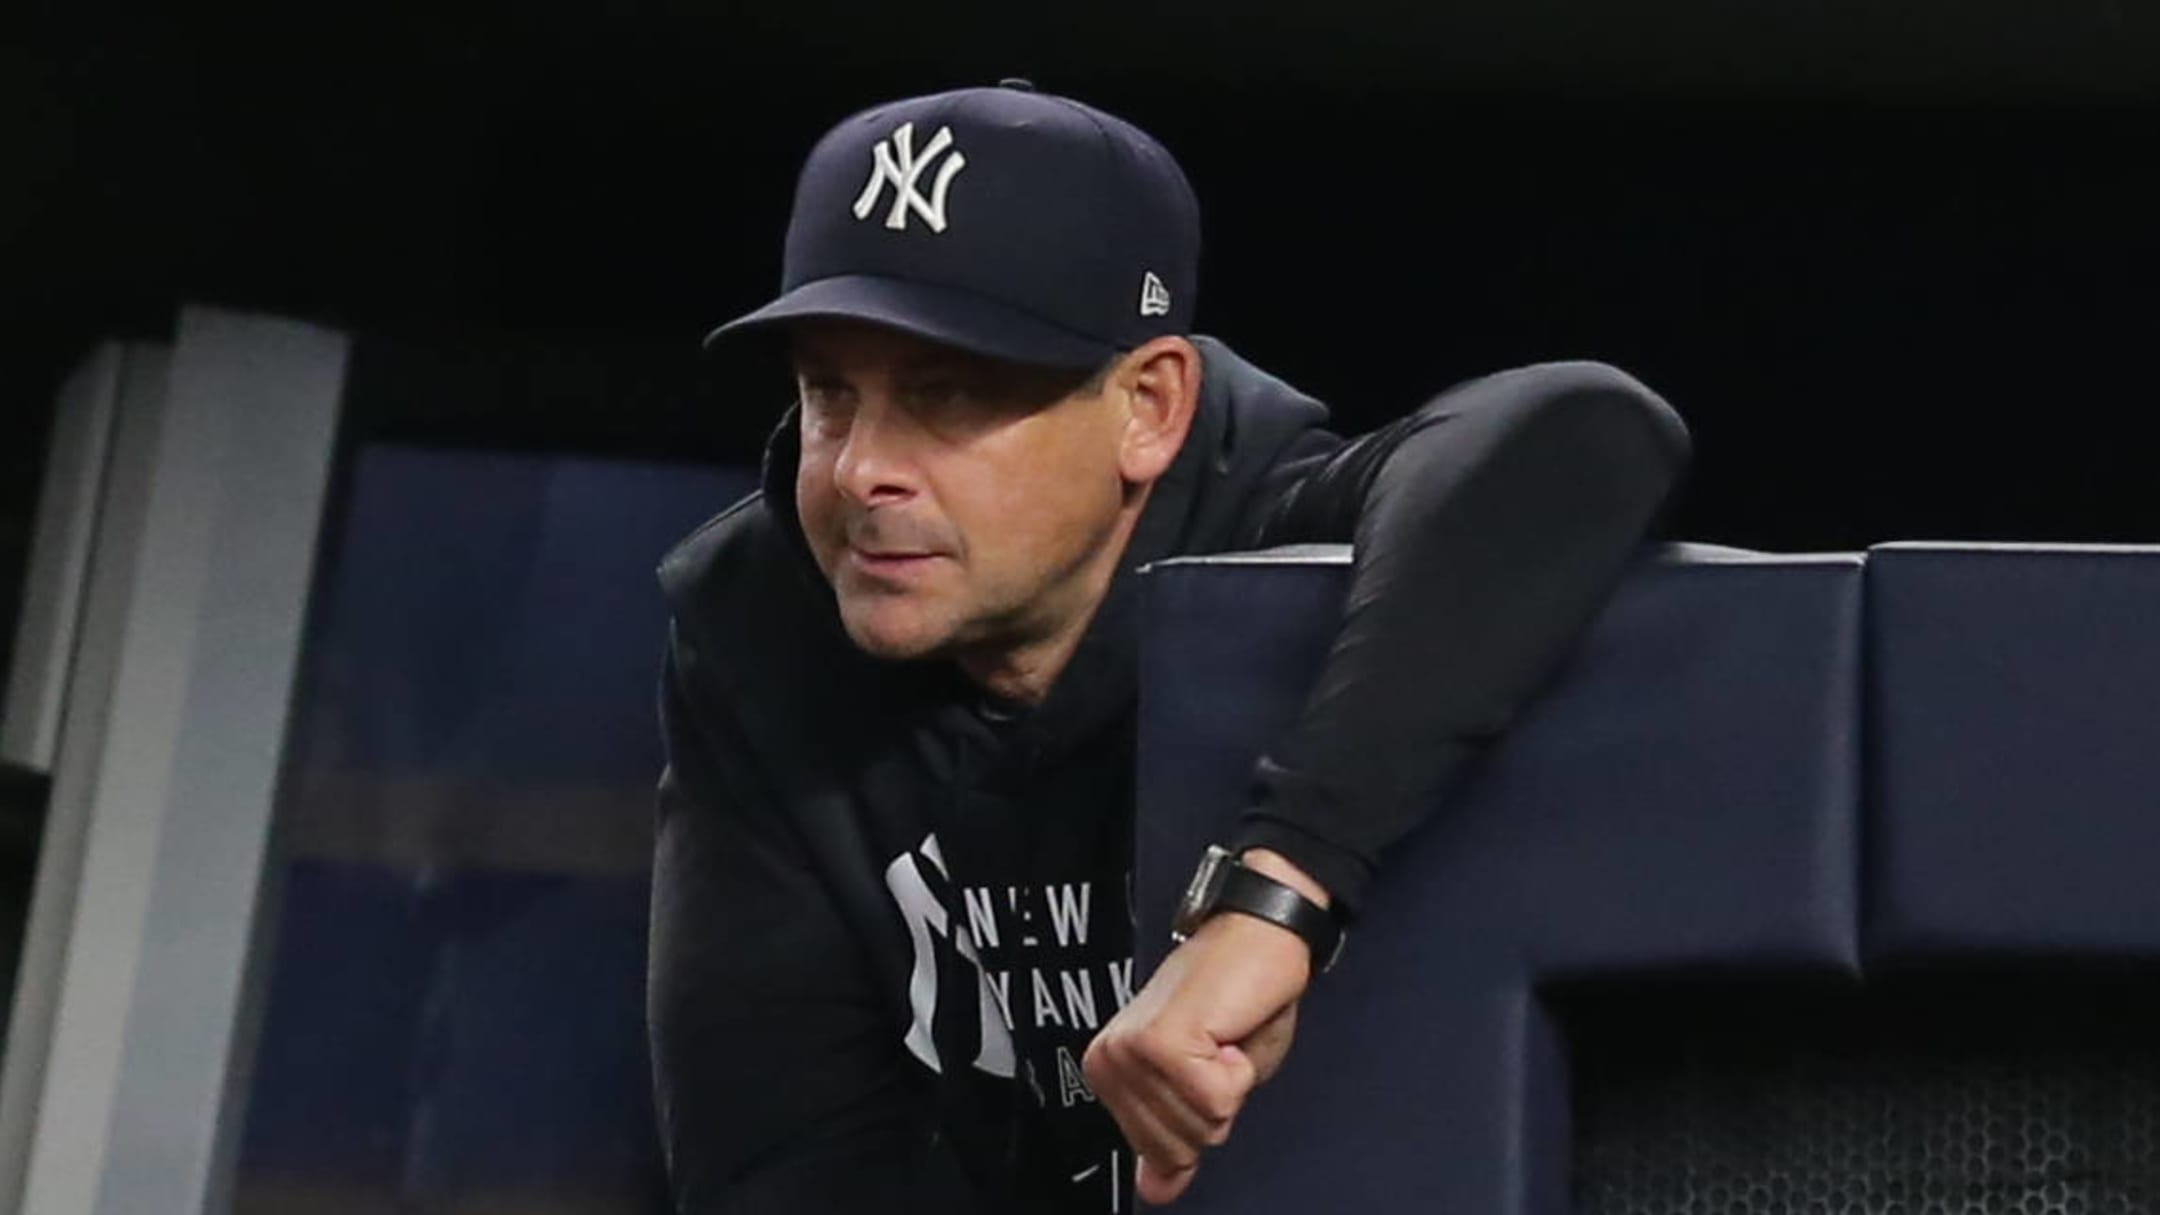 Yankees' skipper Aaron Boone is on an ejection heater - Pinstripe